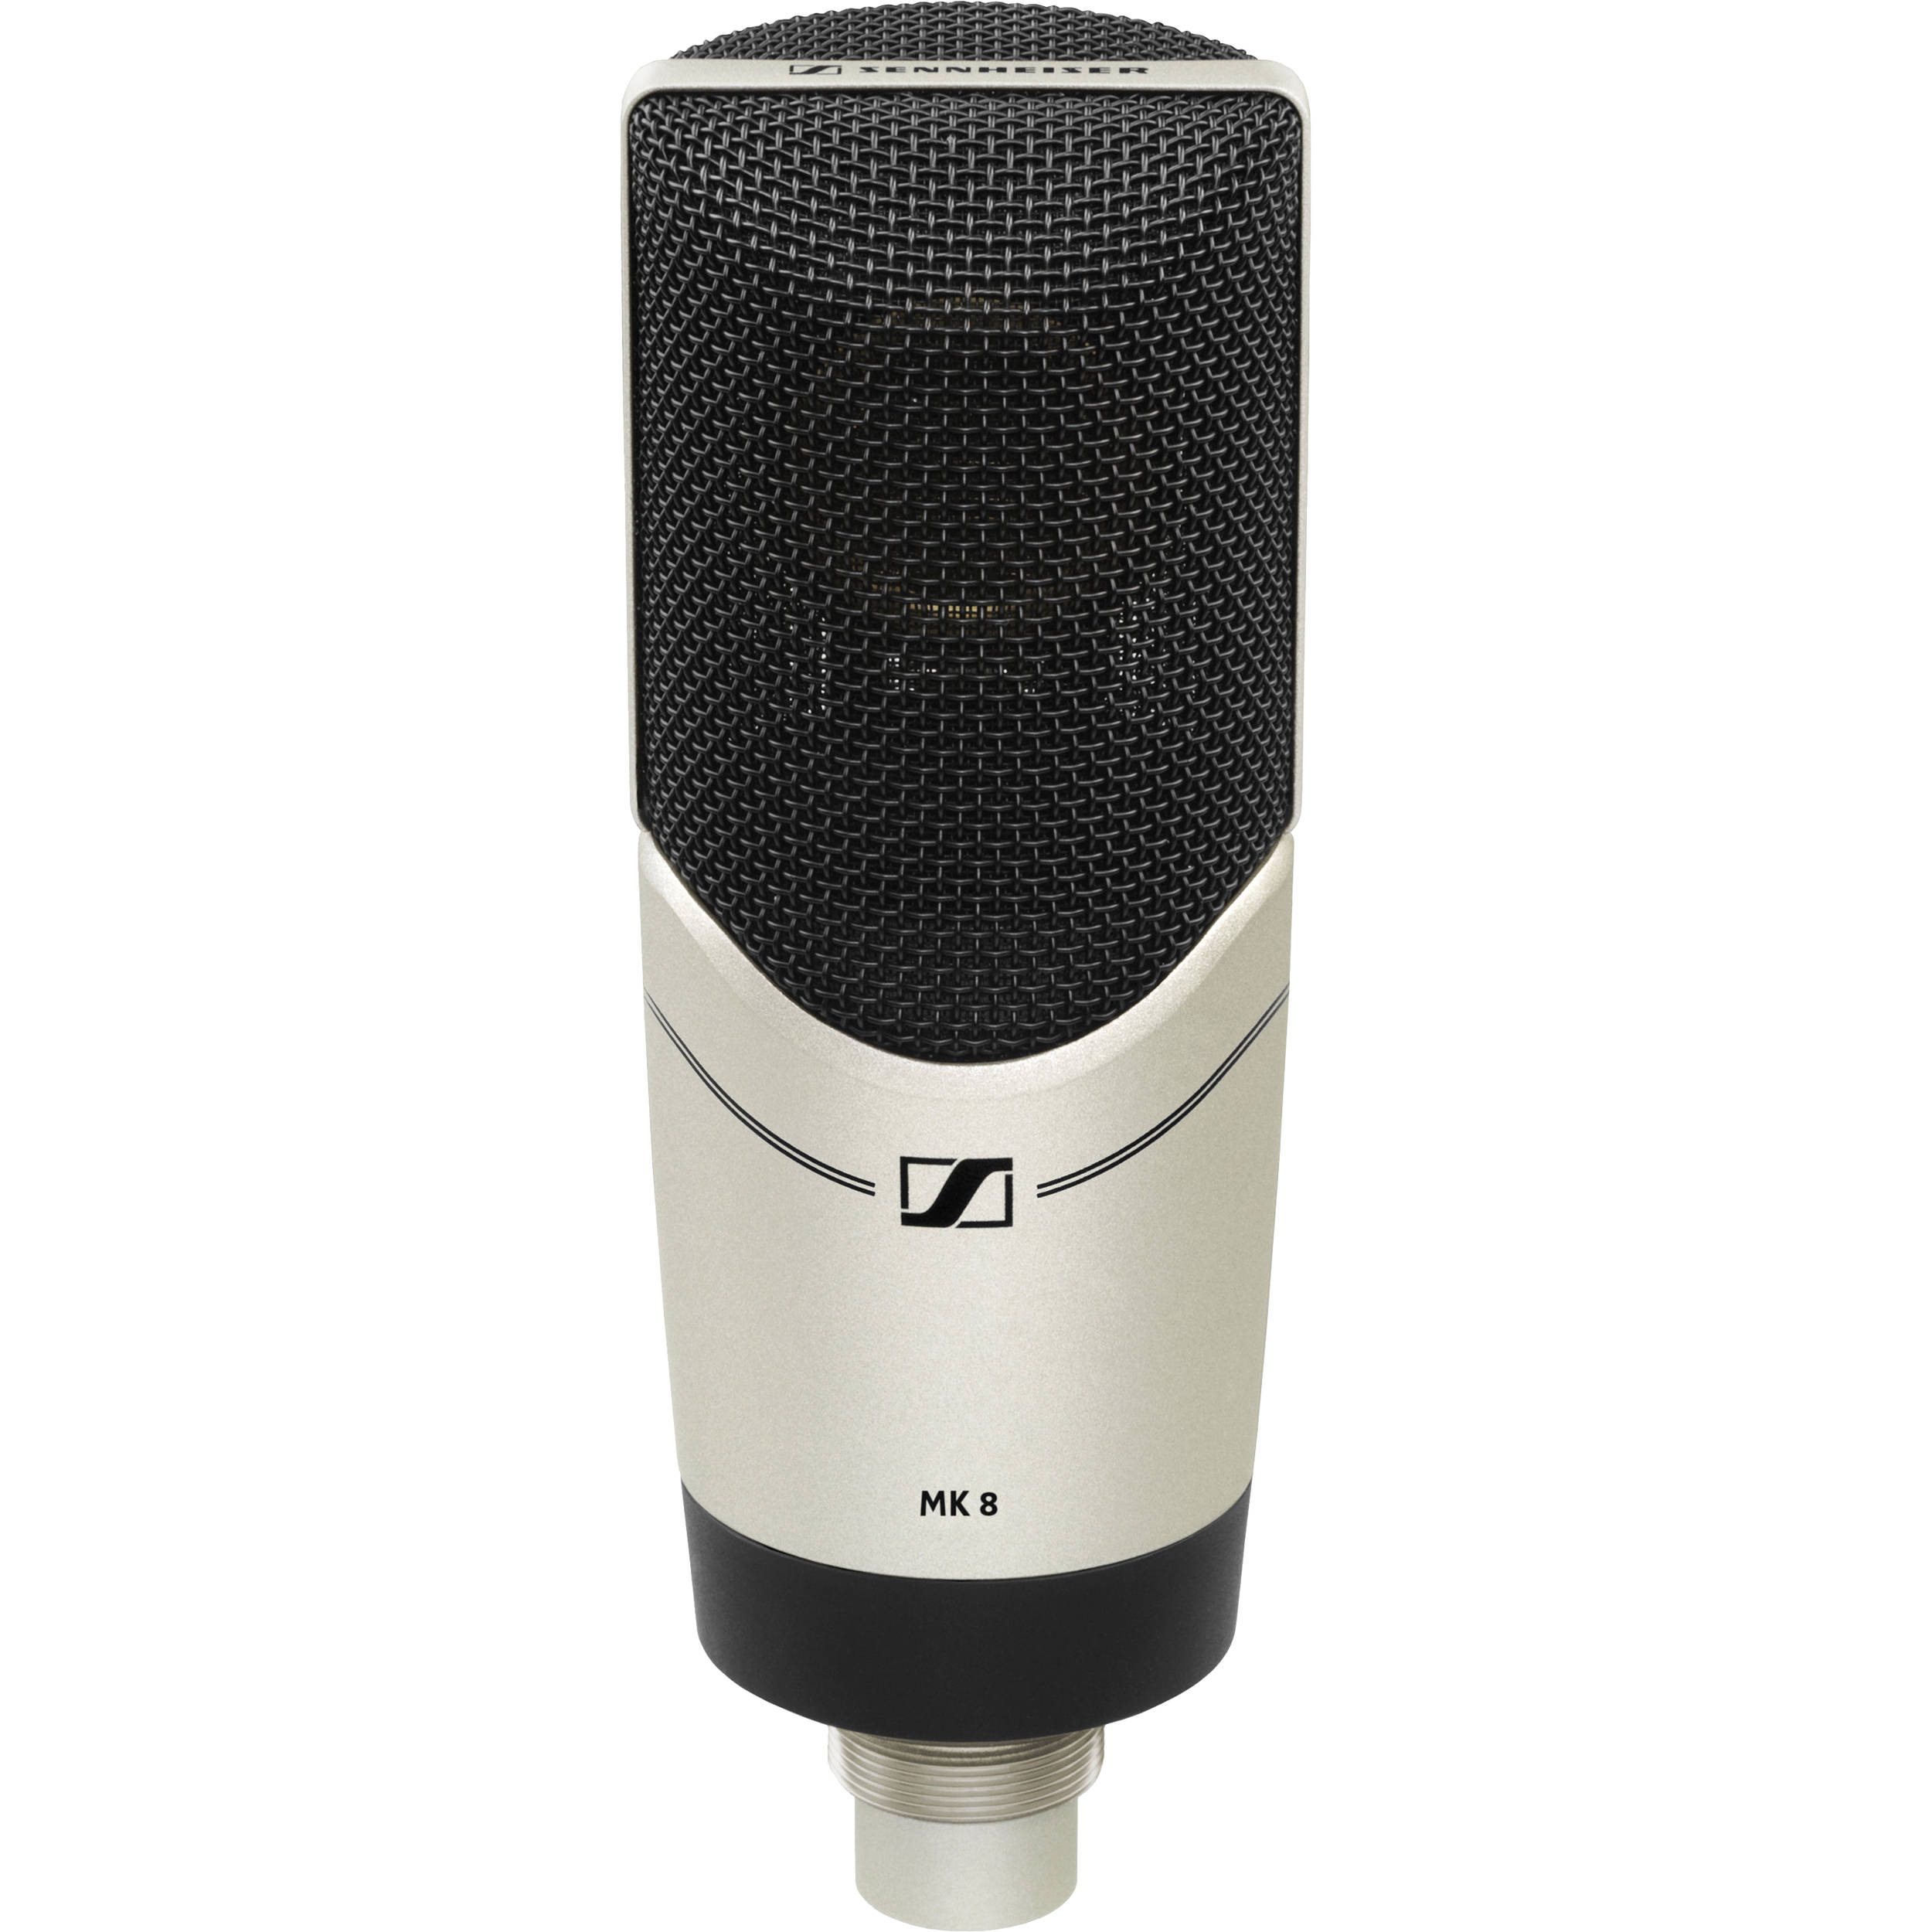 https://audioshopdubai.com/product/xsw-1-835-dual-vocal-set-with-two-835-handheld-microphones/